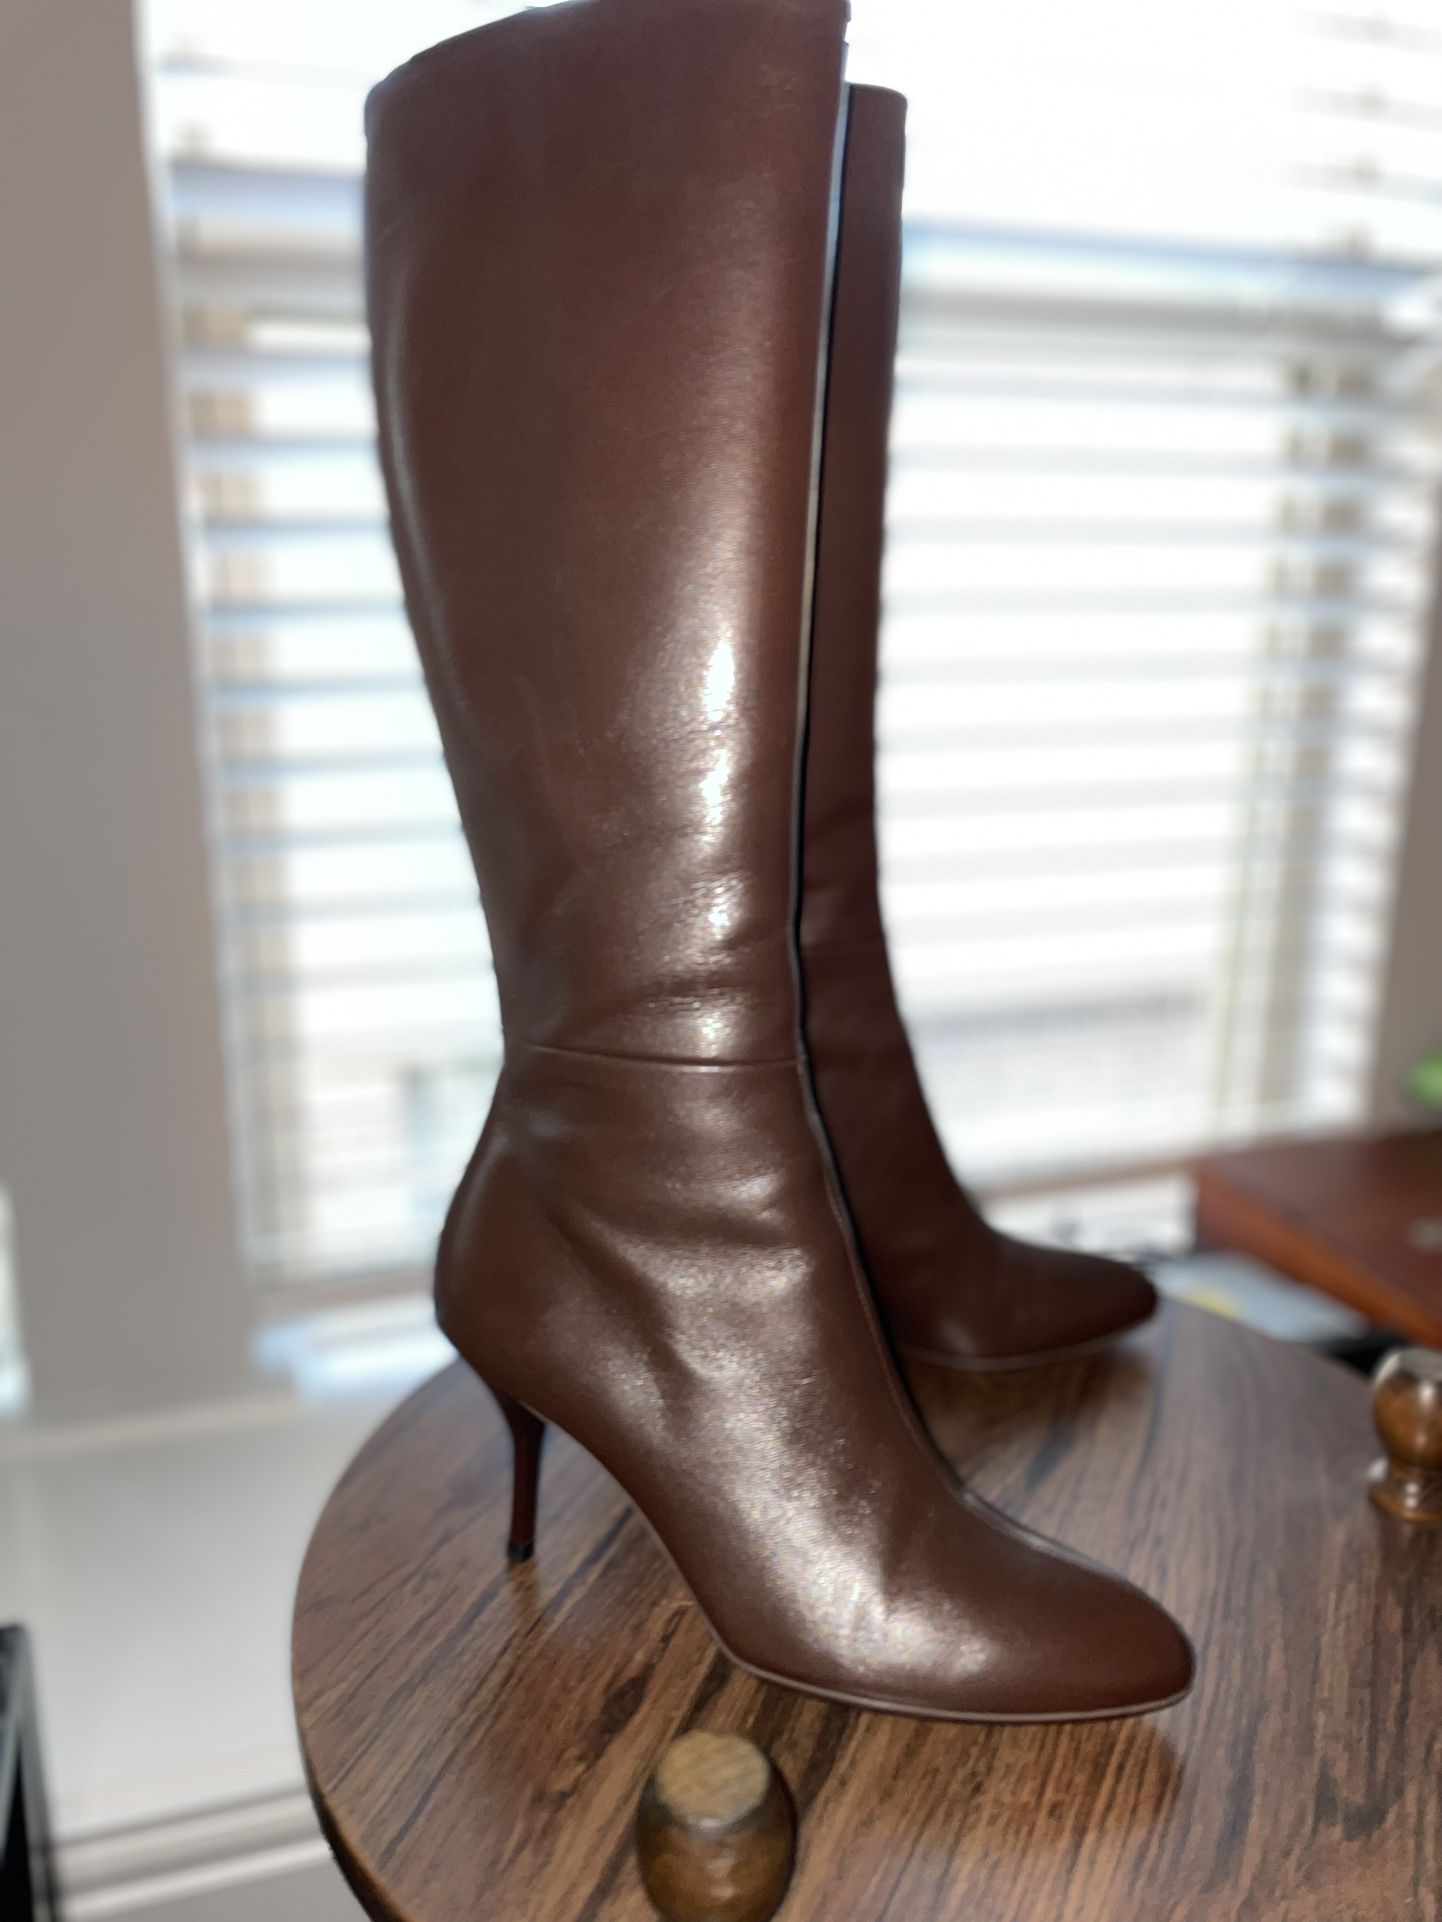 Gucci Black Knee High Boots 36.5 6.5 for Sale in Tustin, CA - OfferUp